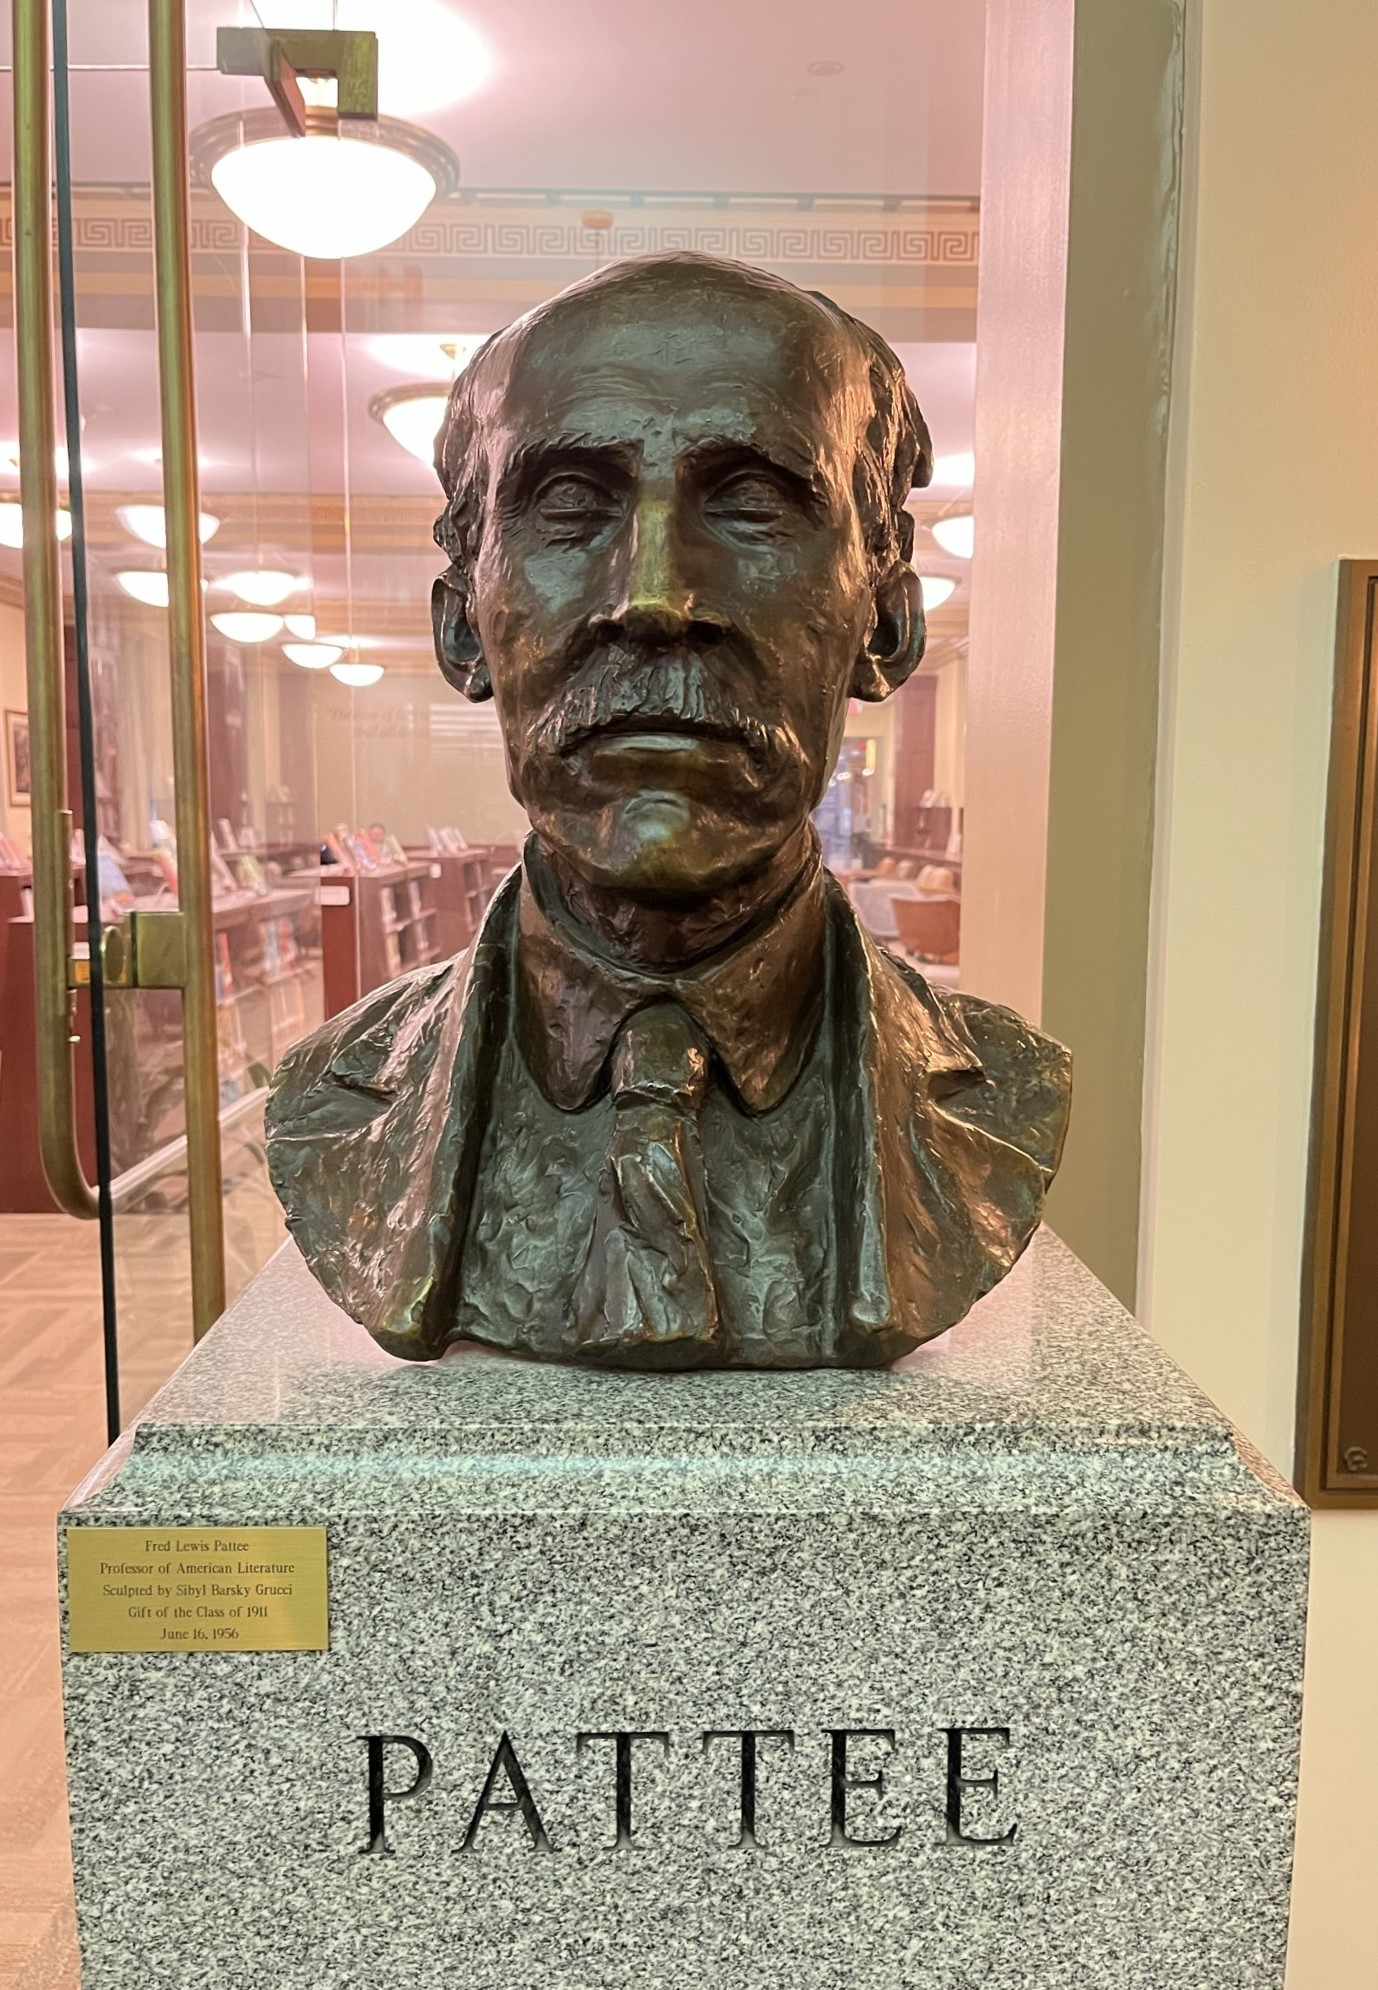 Bust of Pattee